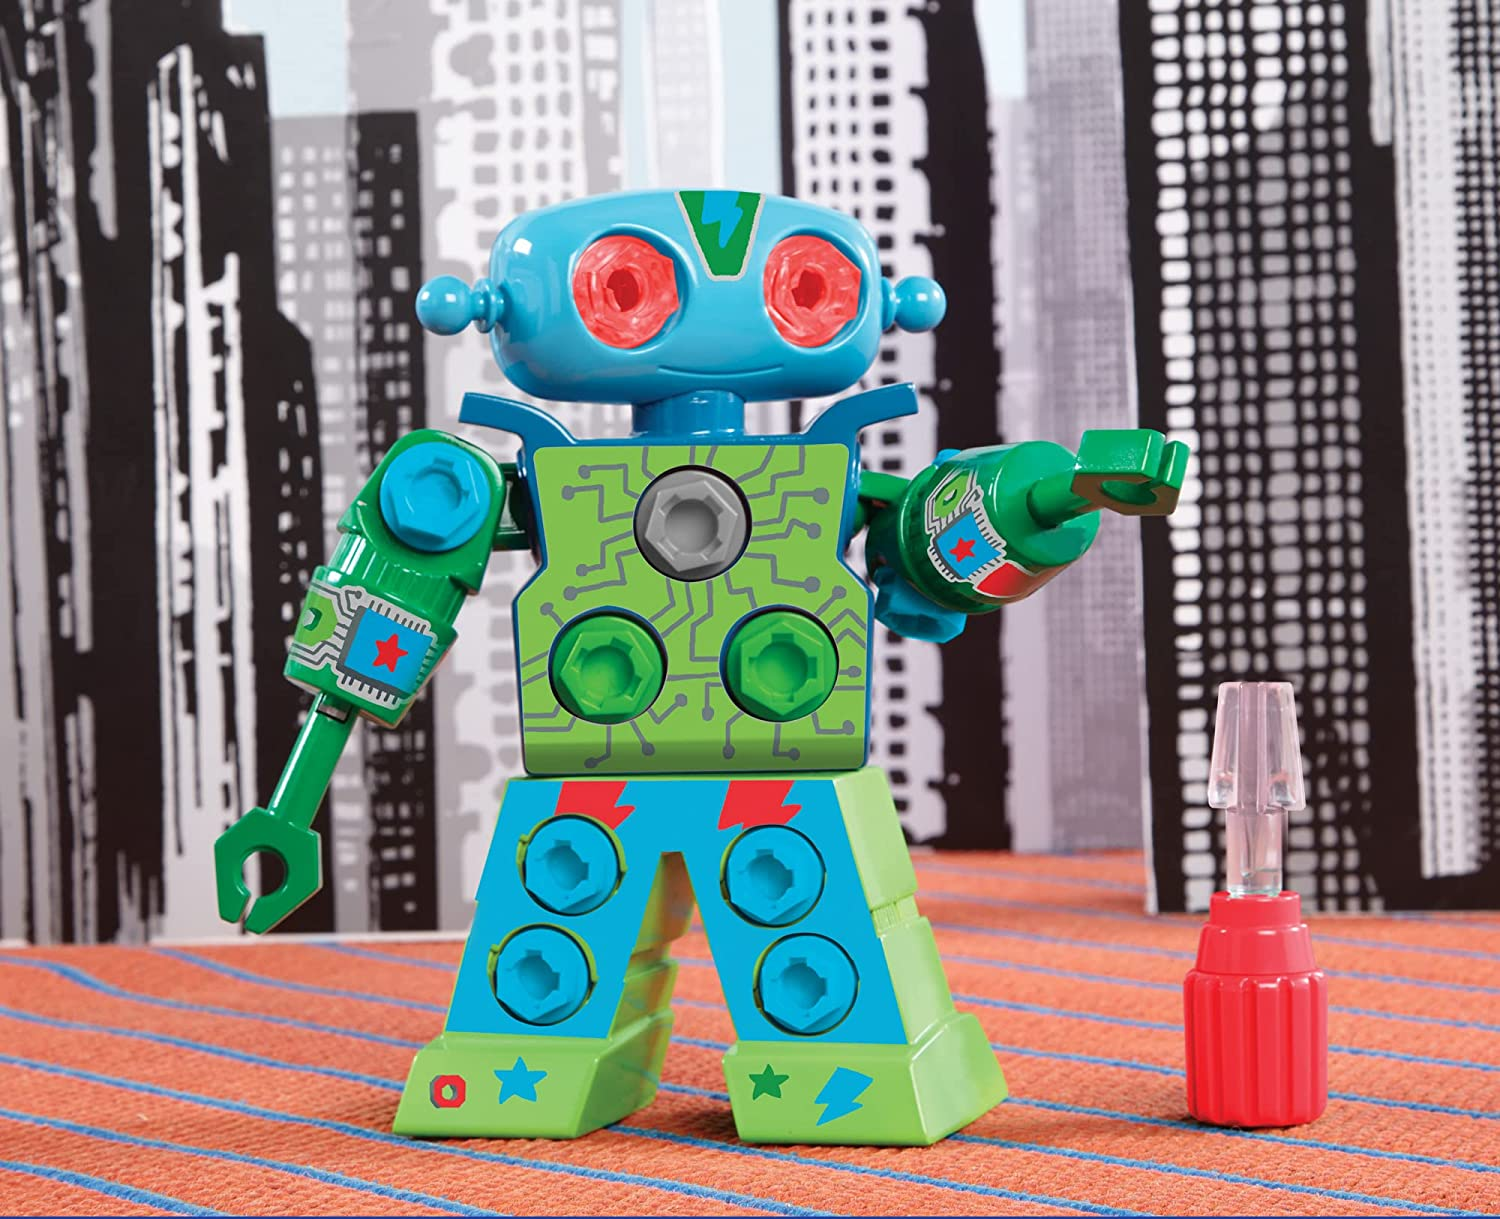 A green and blue  plastic robot toy with red eyes